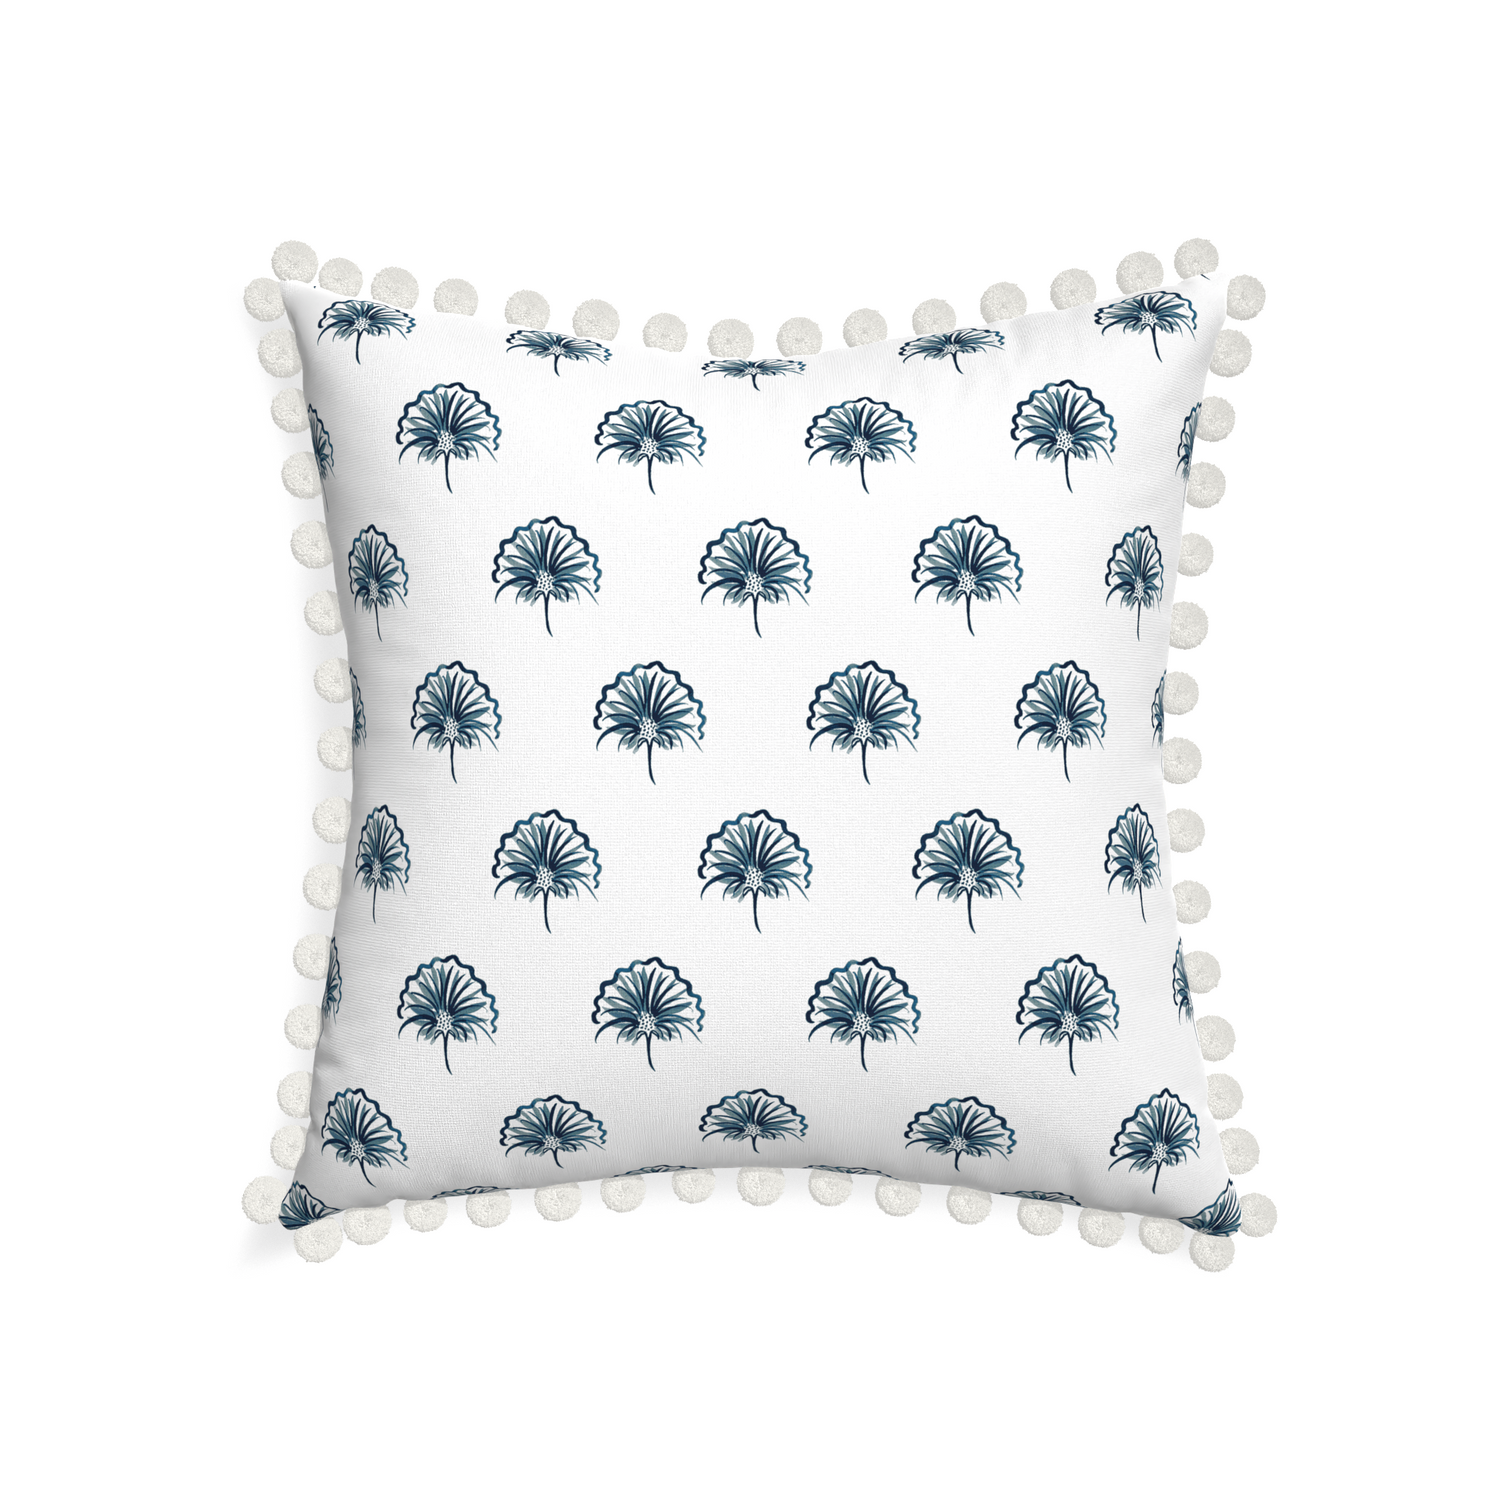 22-square penelope midnight custom floral navypillow with snow pom pom on white background